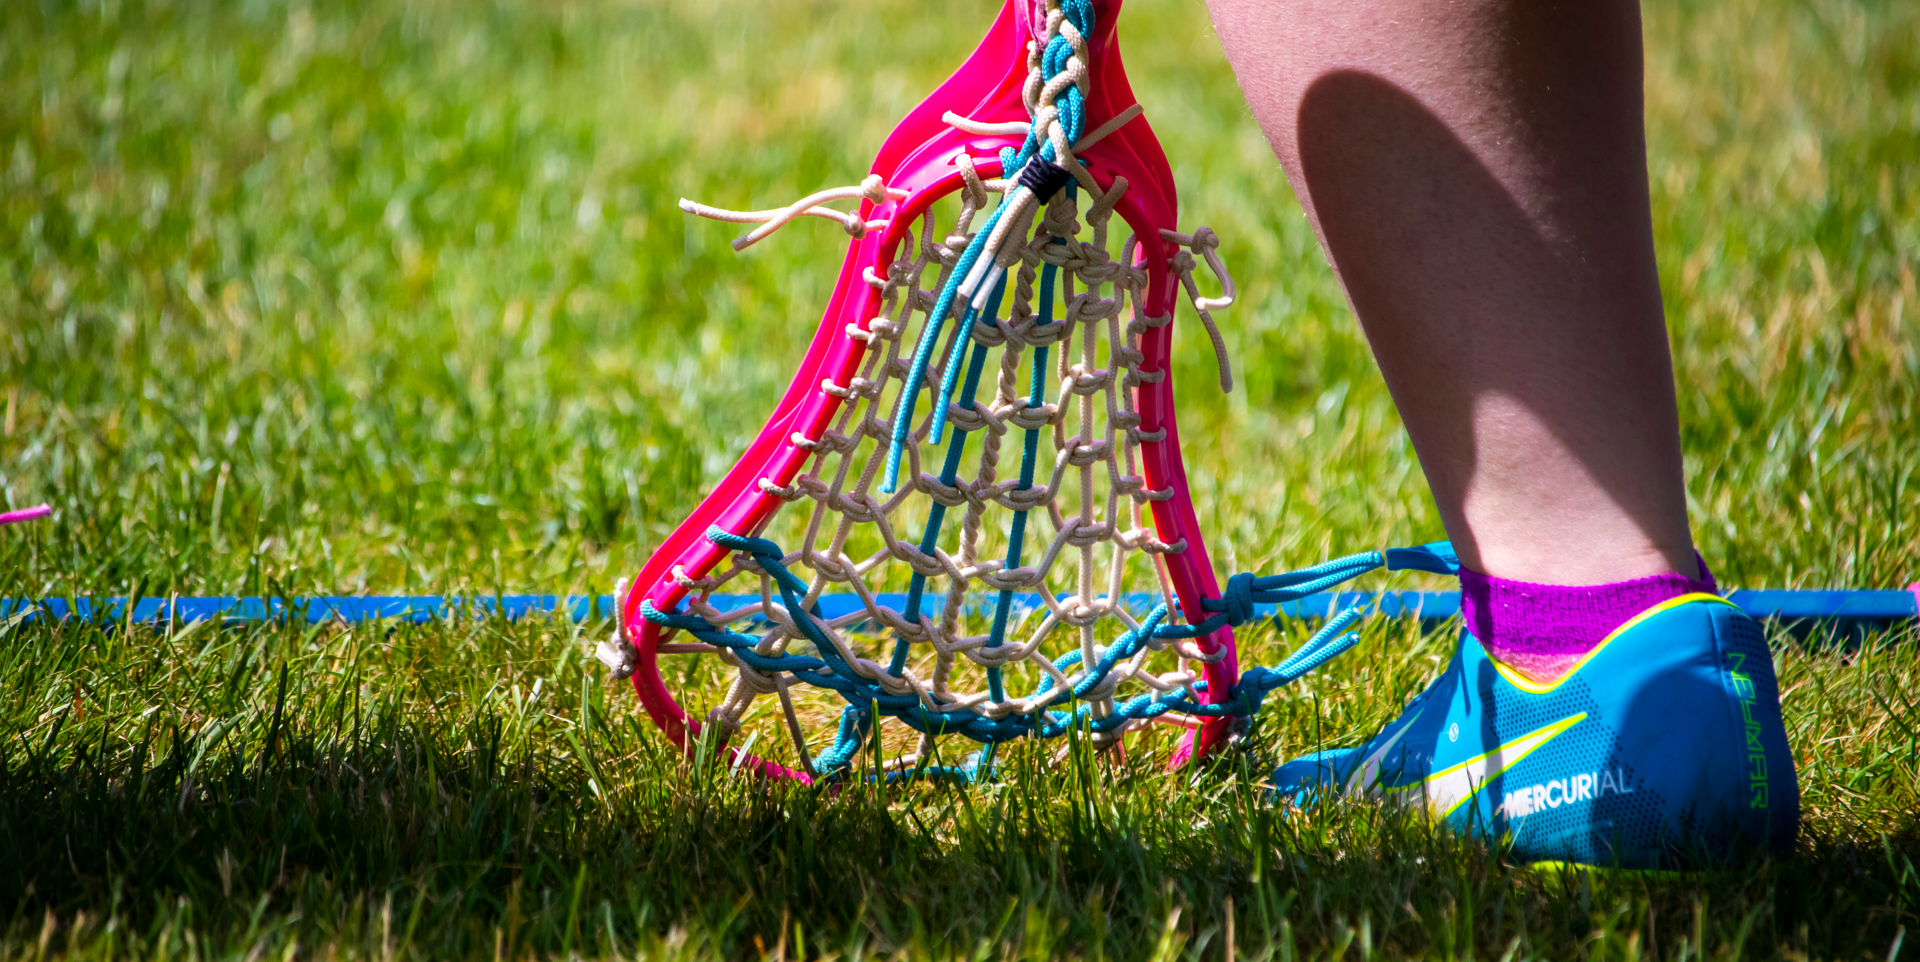 5 Best Lacrosse Cleats For Wide Feet To Outplay Everyone